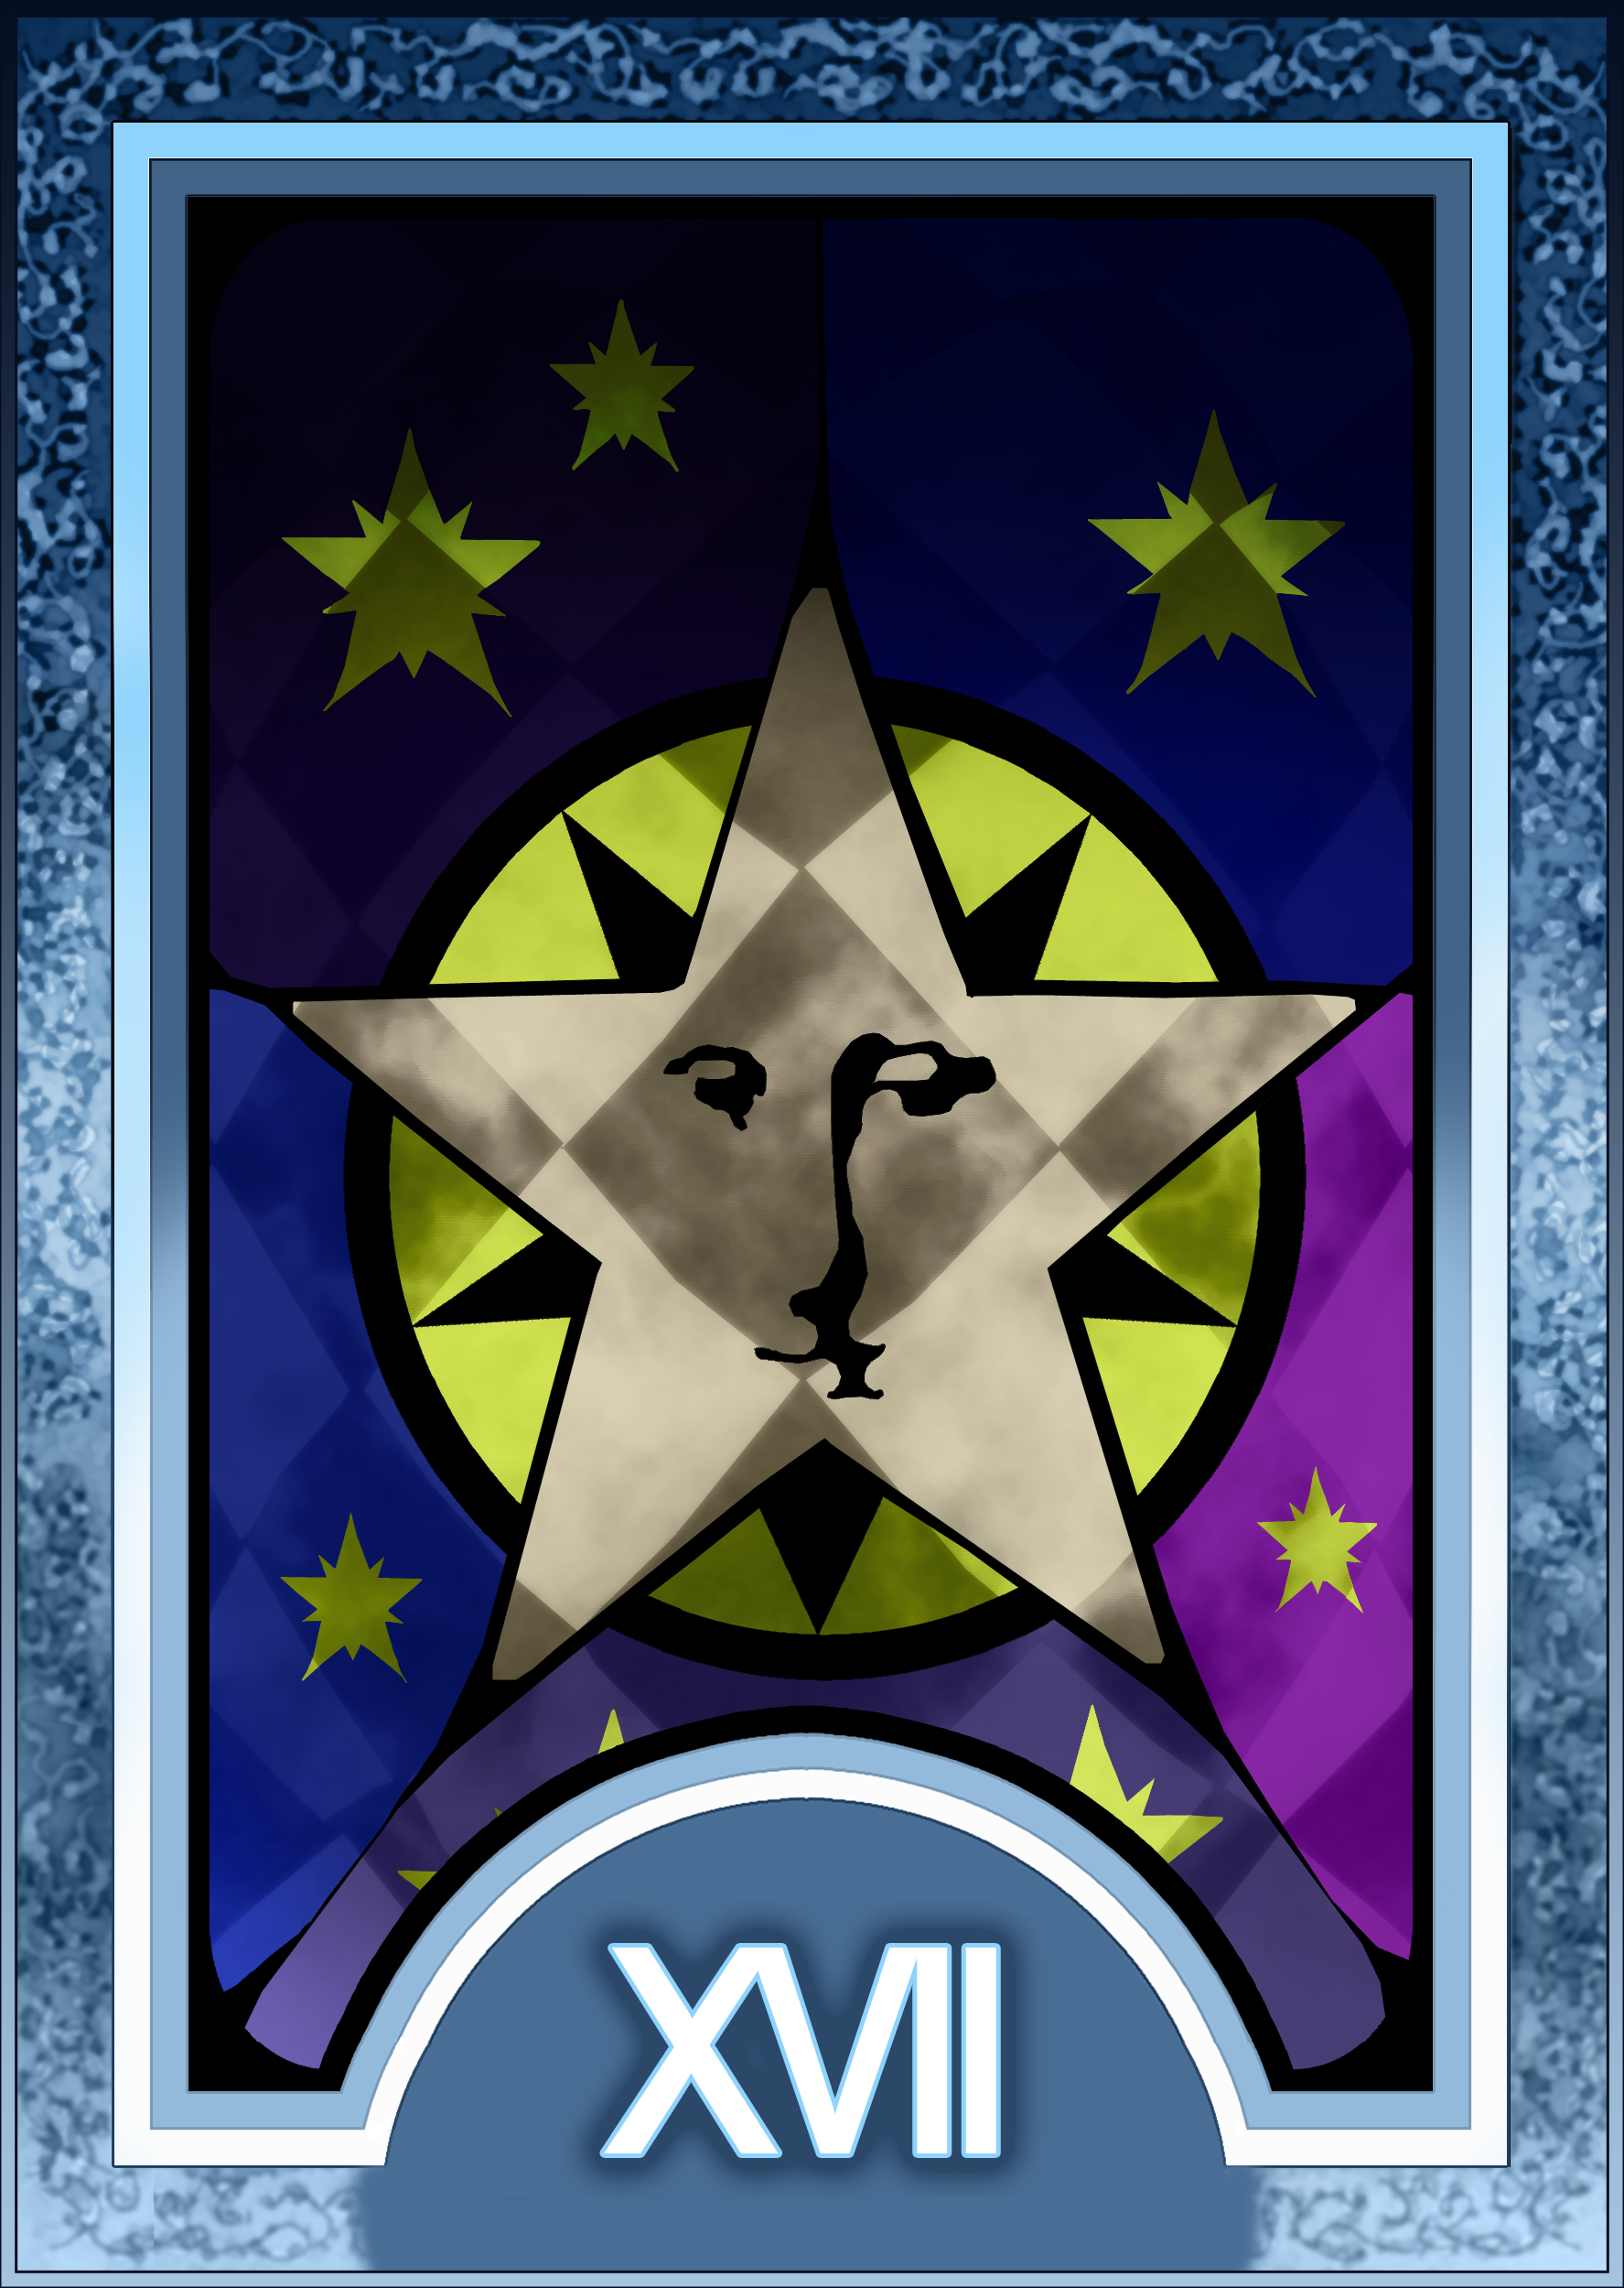 A Journal of Brief Reprieves - Cecil Erinforth's Social Links Persona_3_4_tarot_card_deck_hr___the_star_arcana_by_enetirnel-d6xr6au